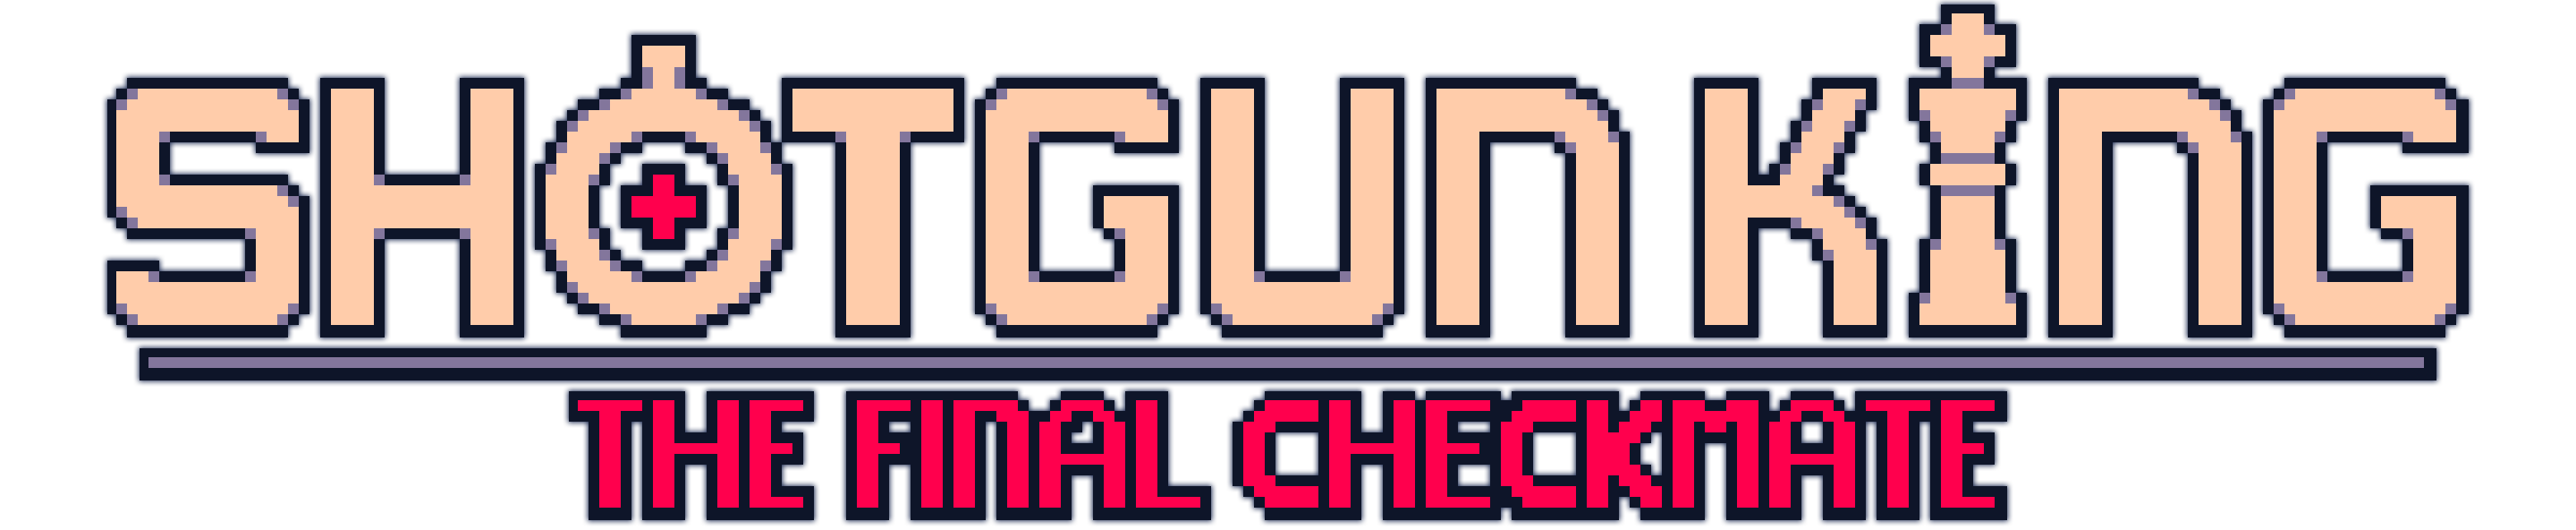 Shotgun King: The Final Checkmate Is Roguelike Chess with Guns Coming Soon  to PS5, PS4